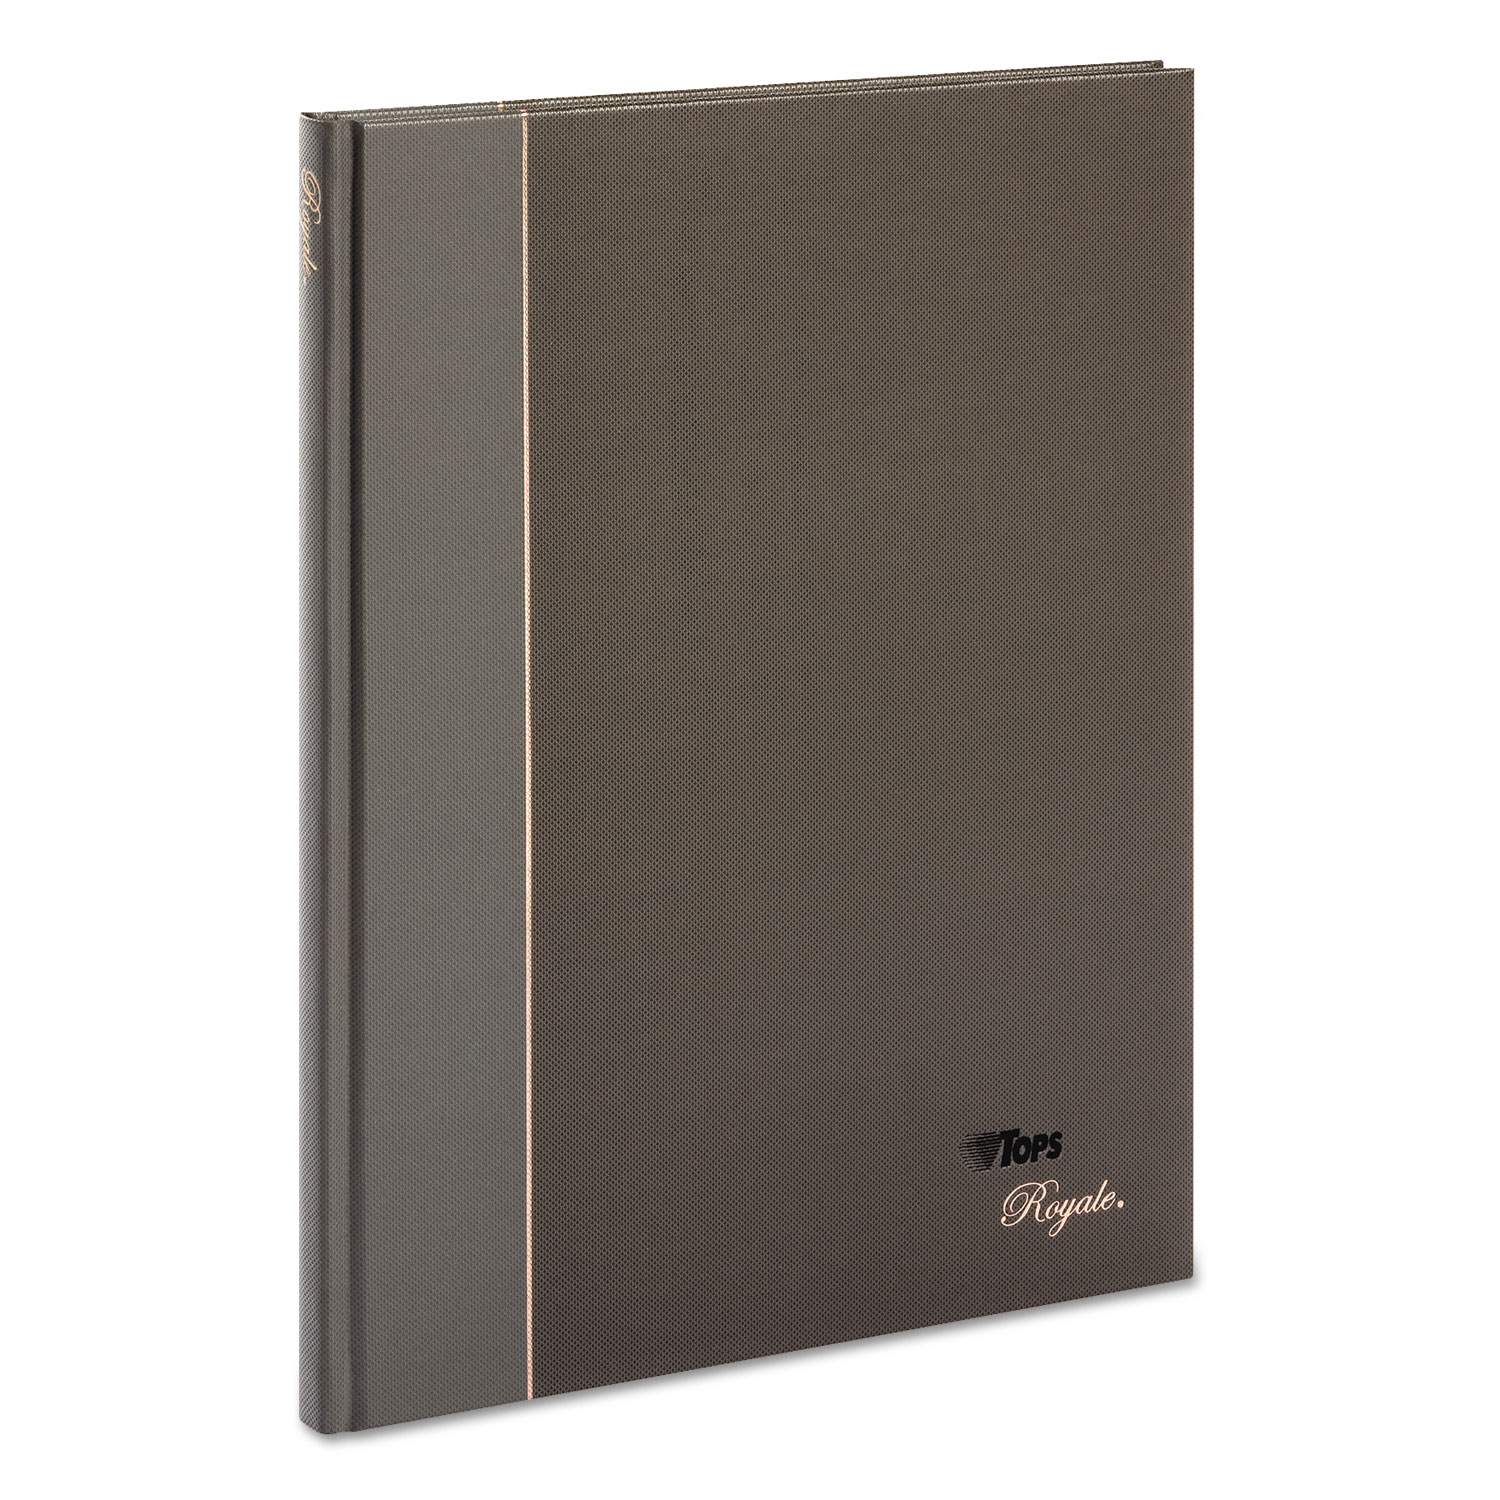  TOPS 25231 Royale Casebound Business Notebook, College, Black/Gray, 10.5 x 8, 96 Sheets (TOP25231) 